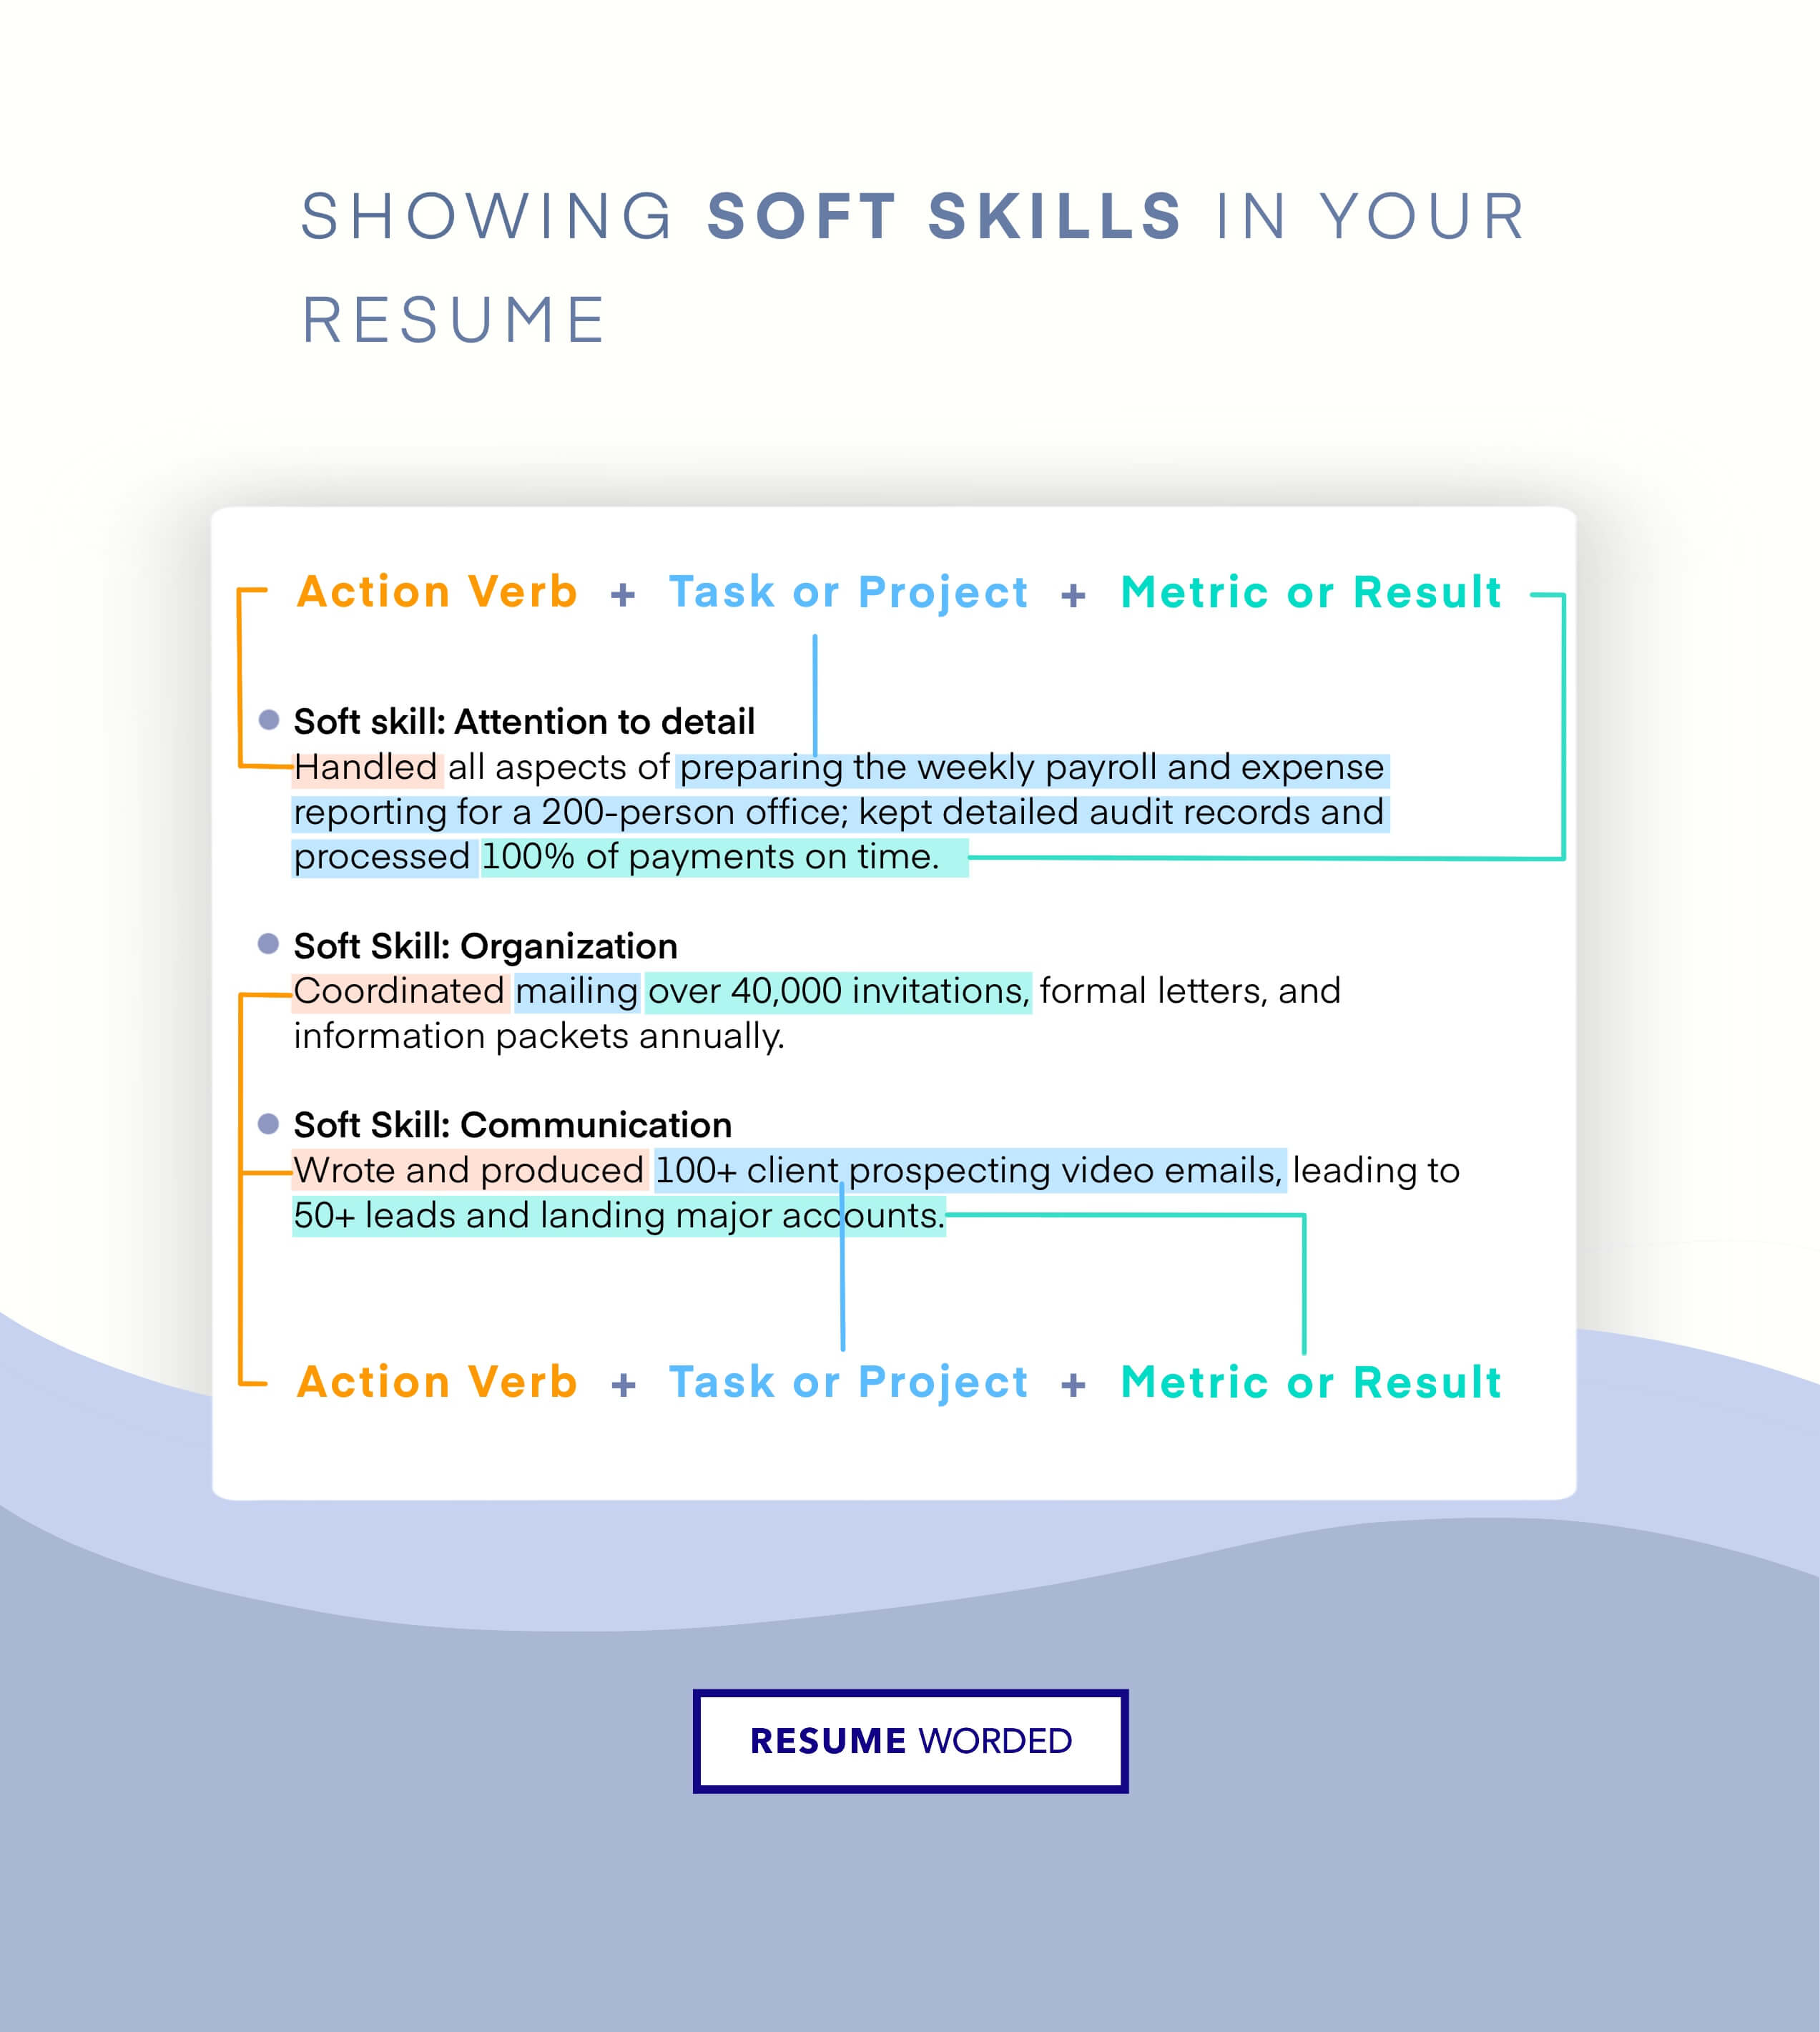 Understand the significance of soft skills - Advertising Account Executive CV